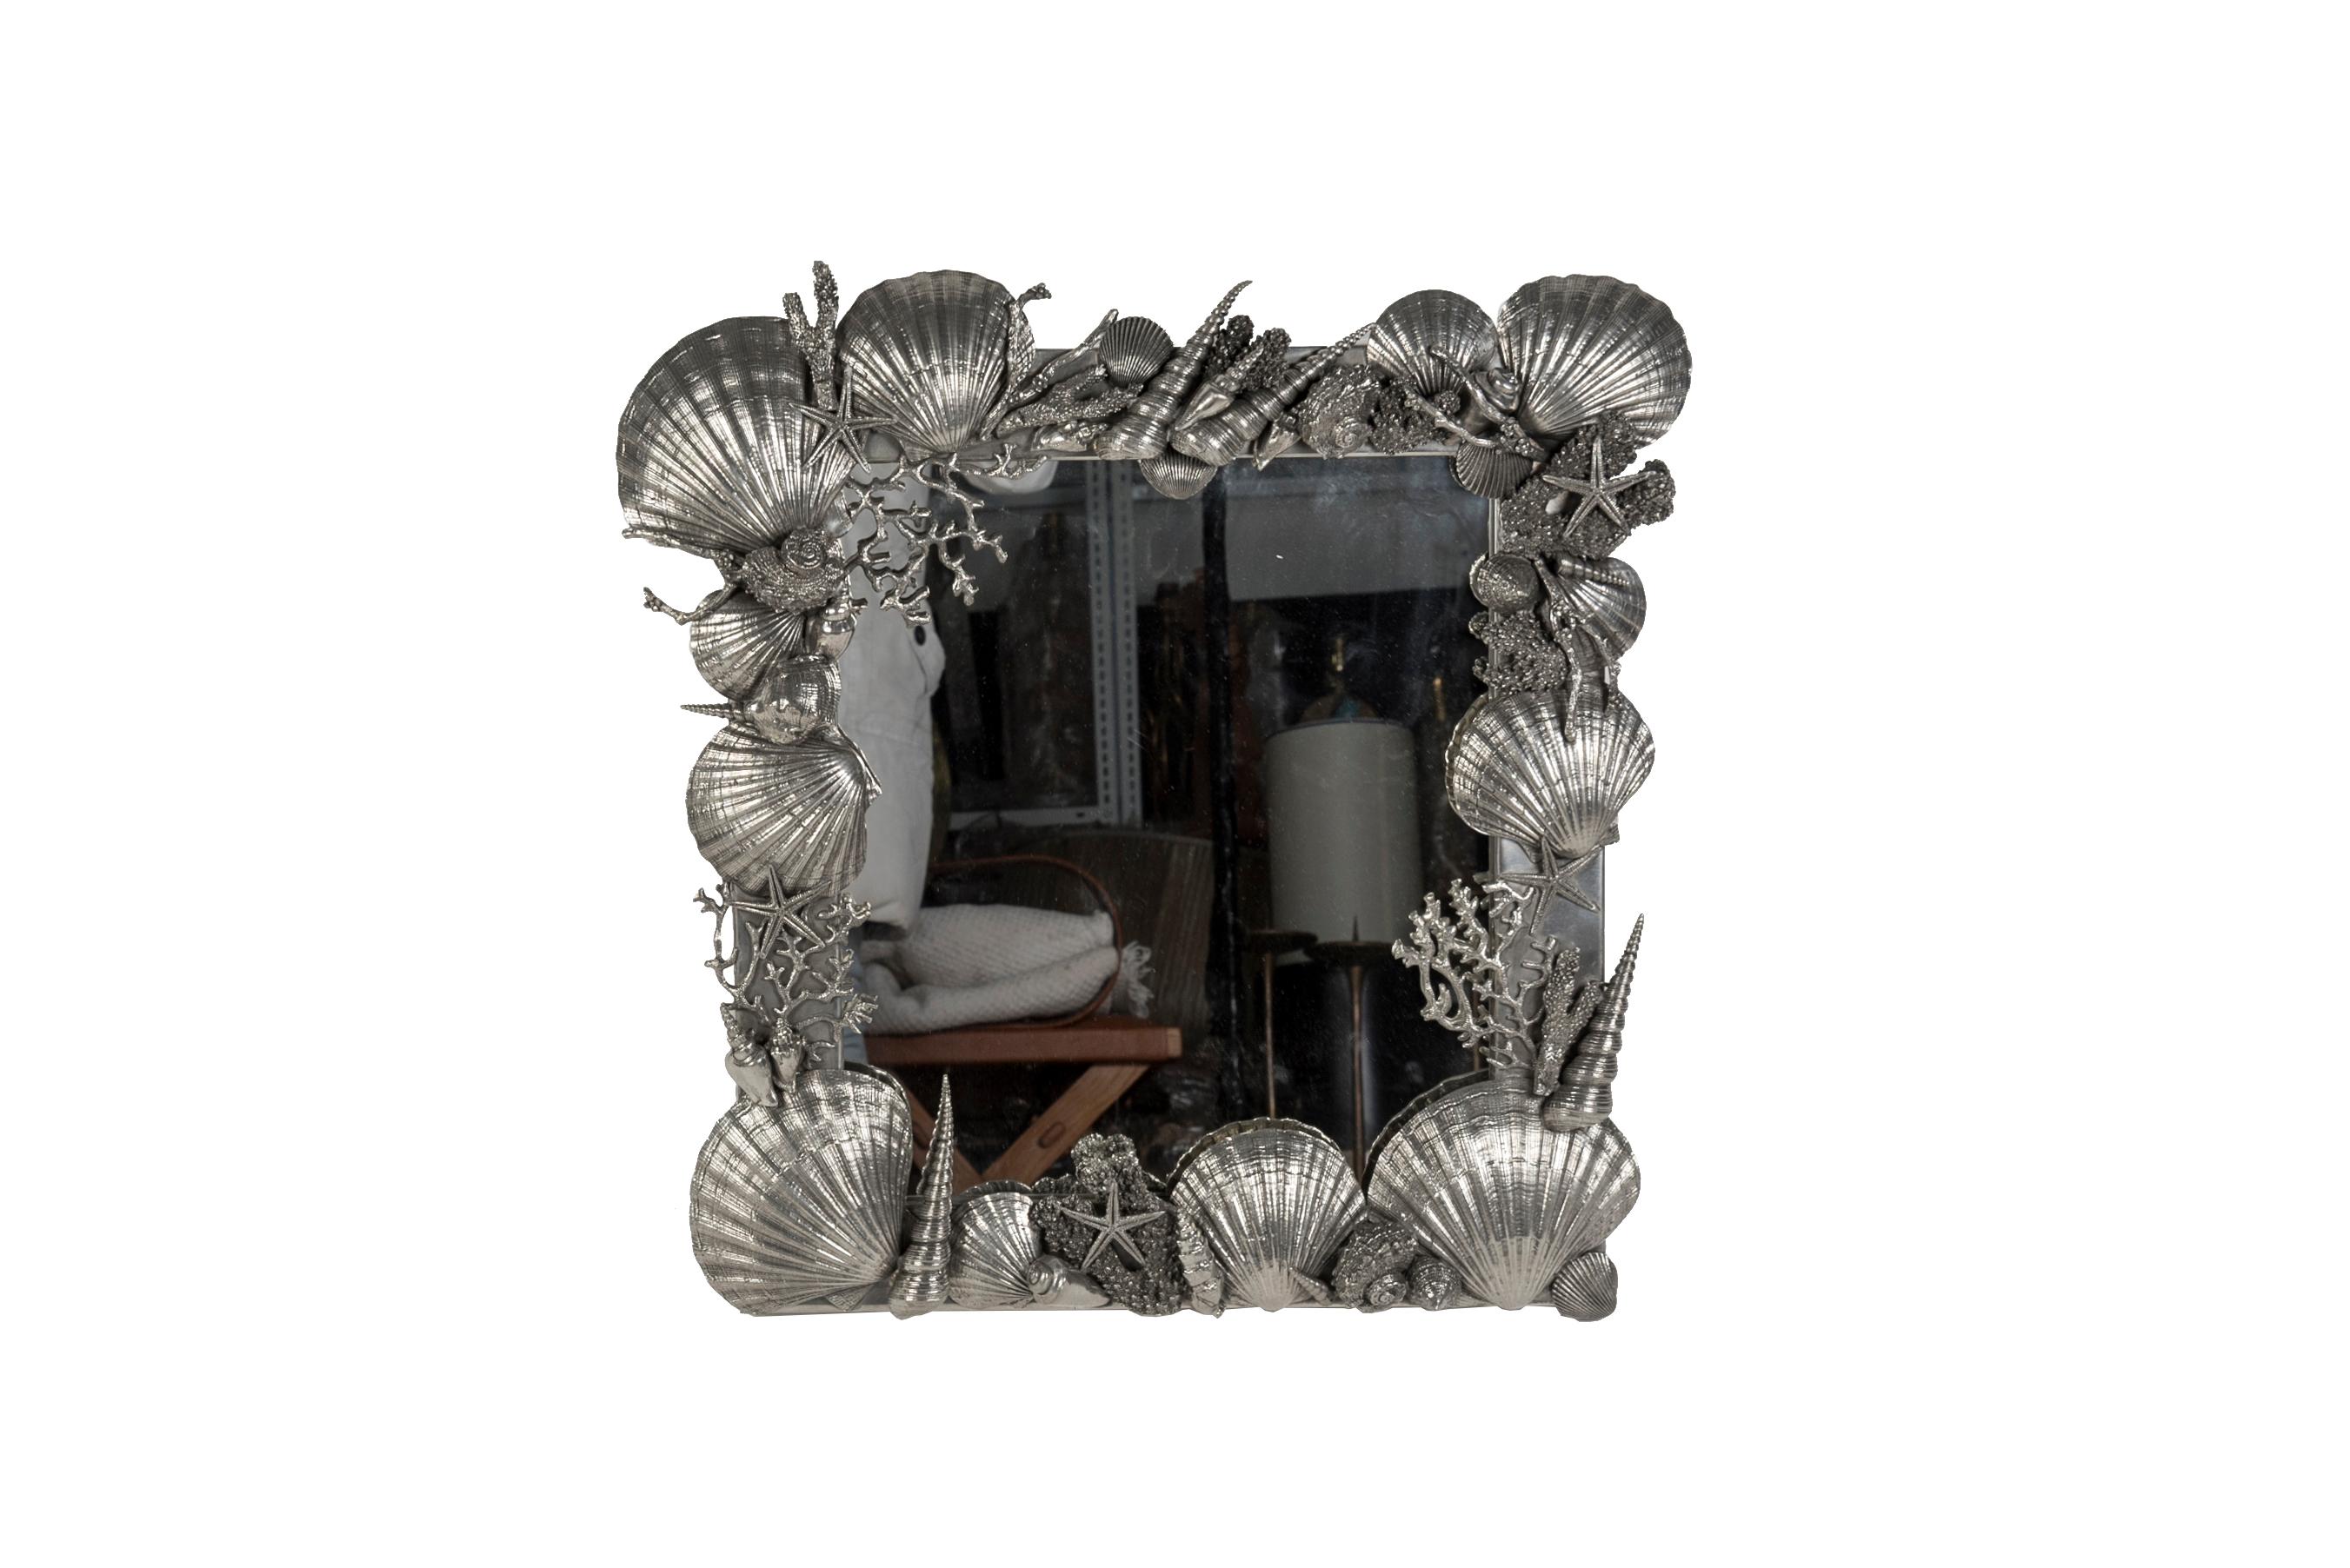 Rare polished pewter mirror in the style of the XVIII th century
Signed Figura Piero